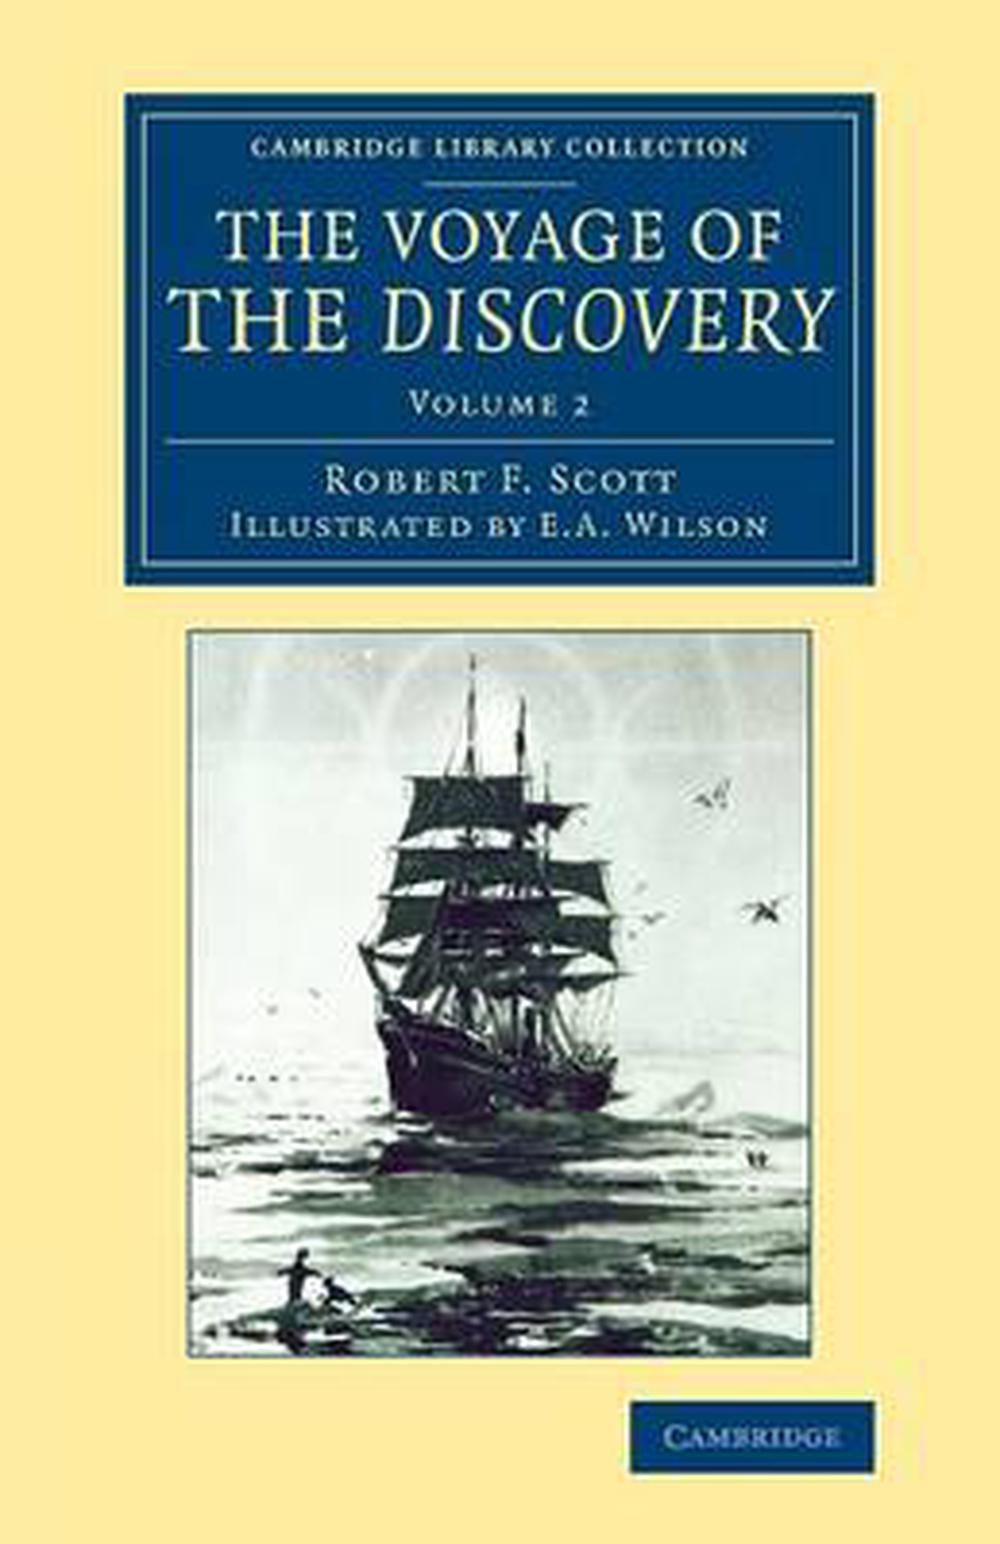 voyages of discovery series